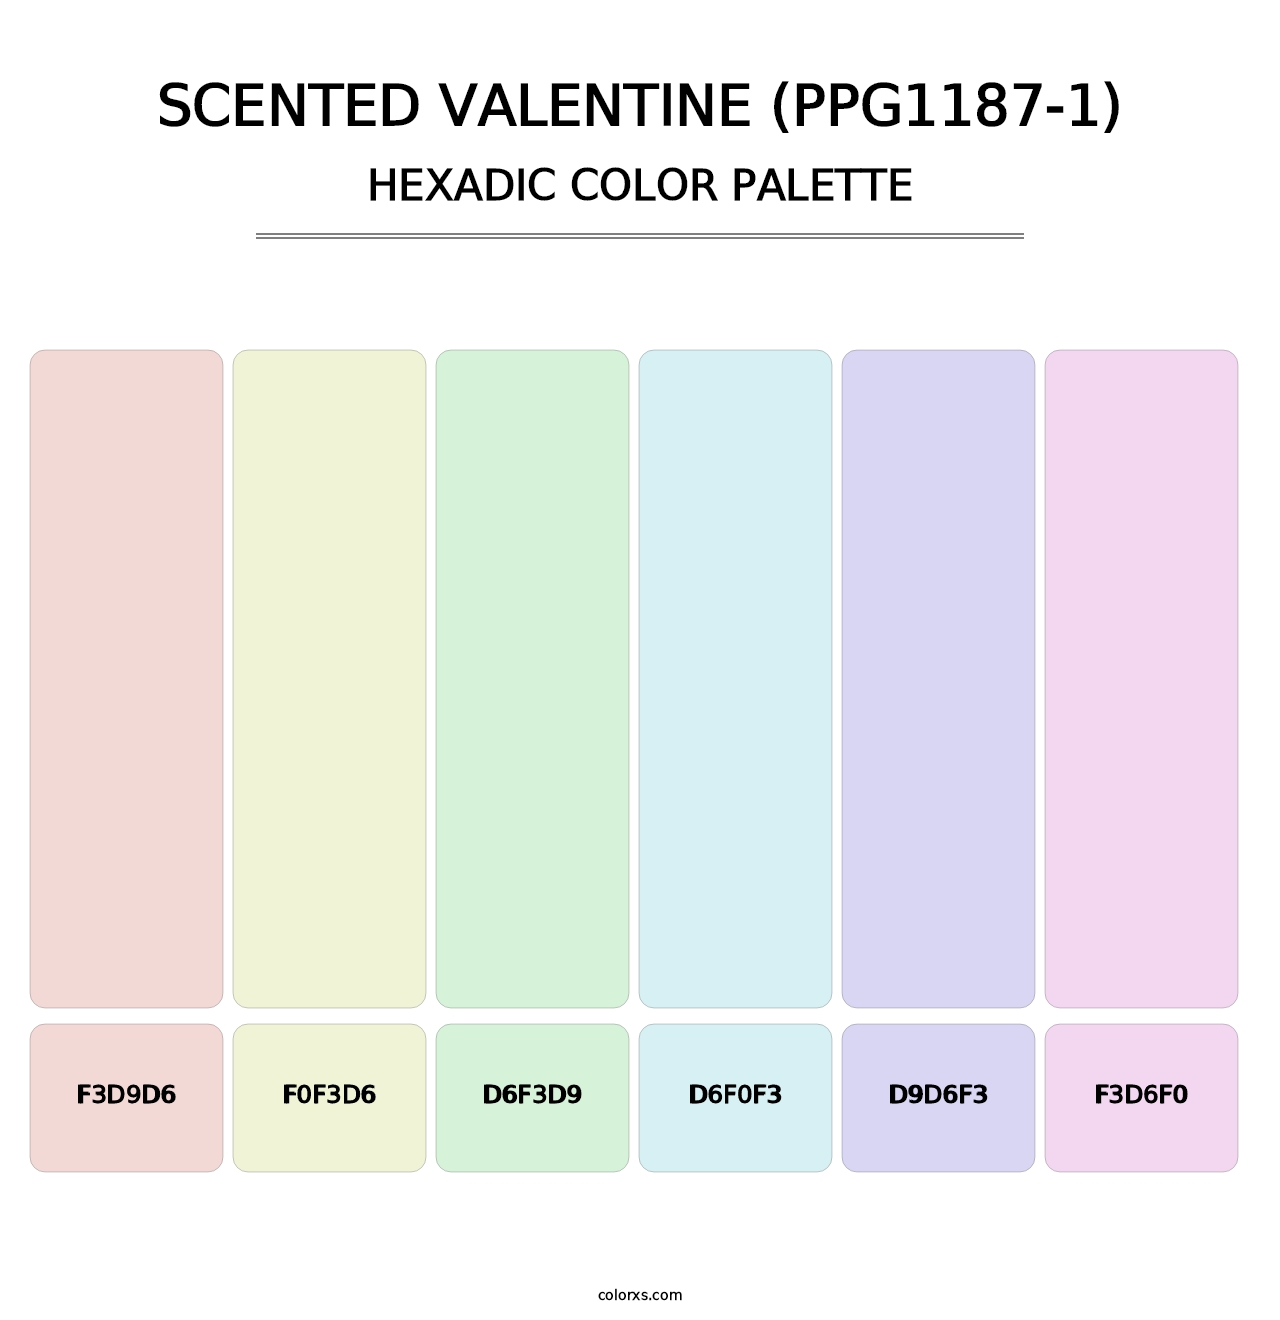 Scented Valentine (PPG1187-1) - Hexadic Color Palette